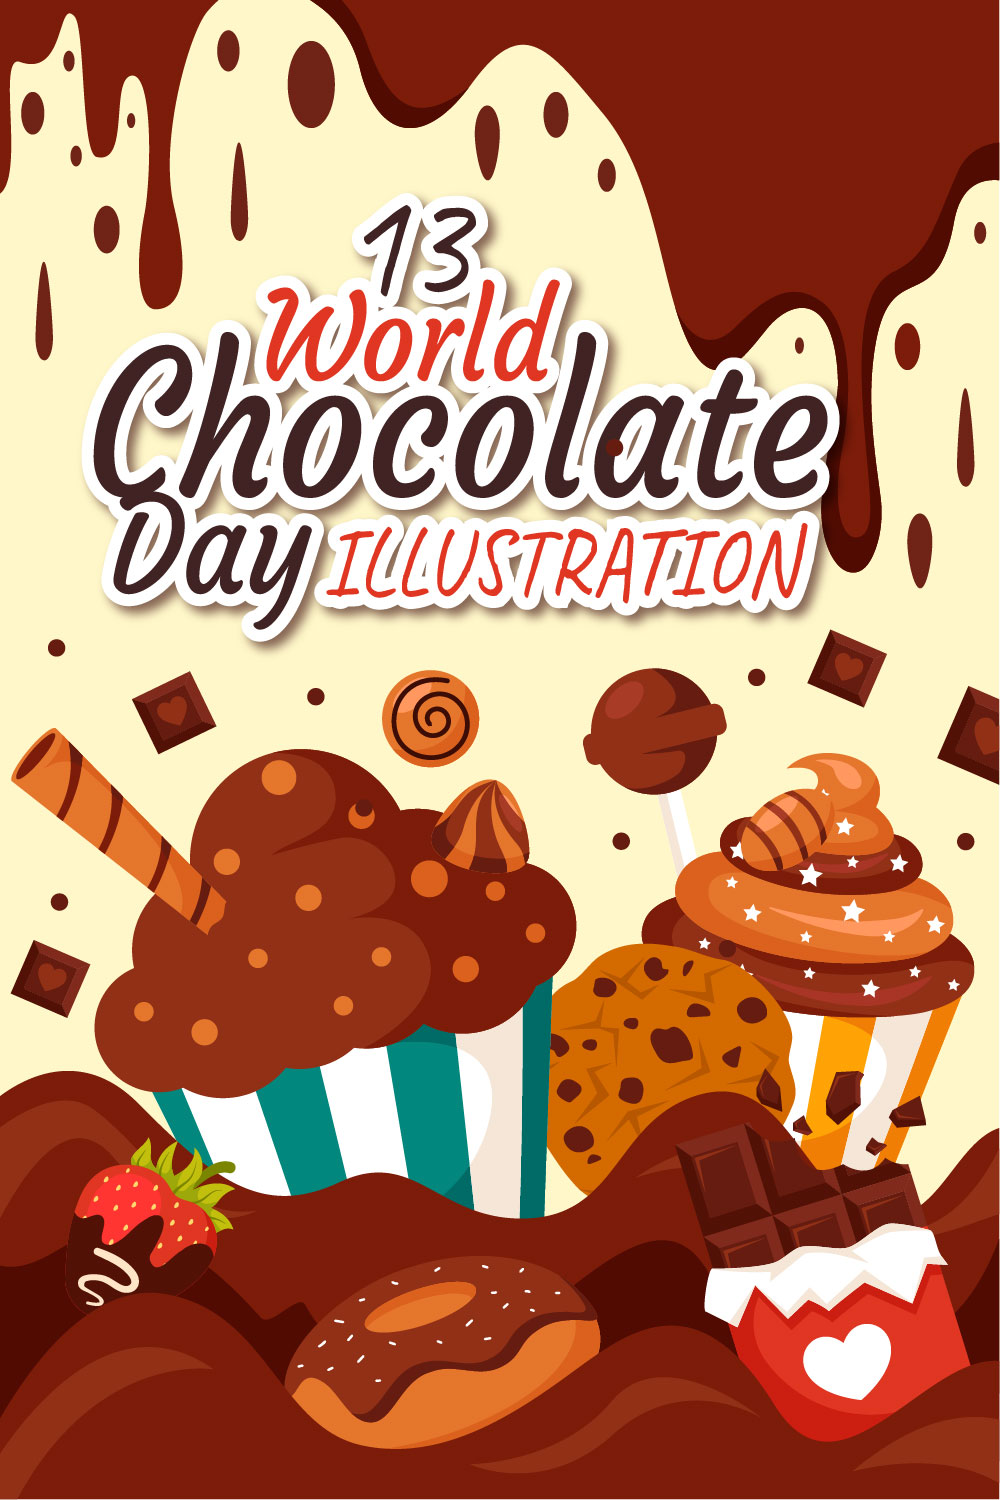 13 World Chocolate Day Illustration pinterest preview image.